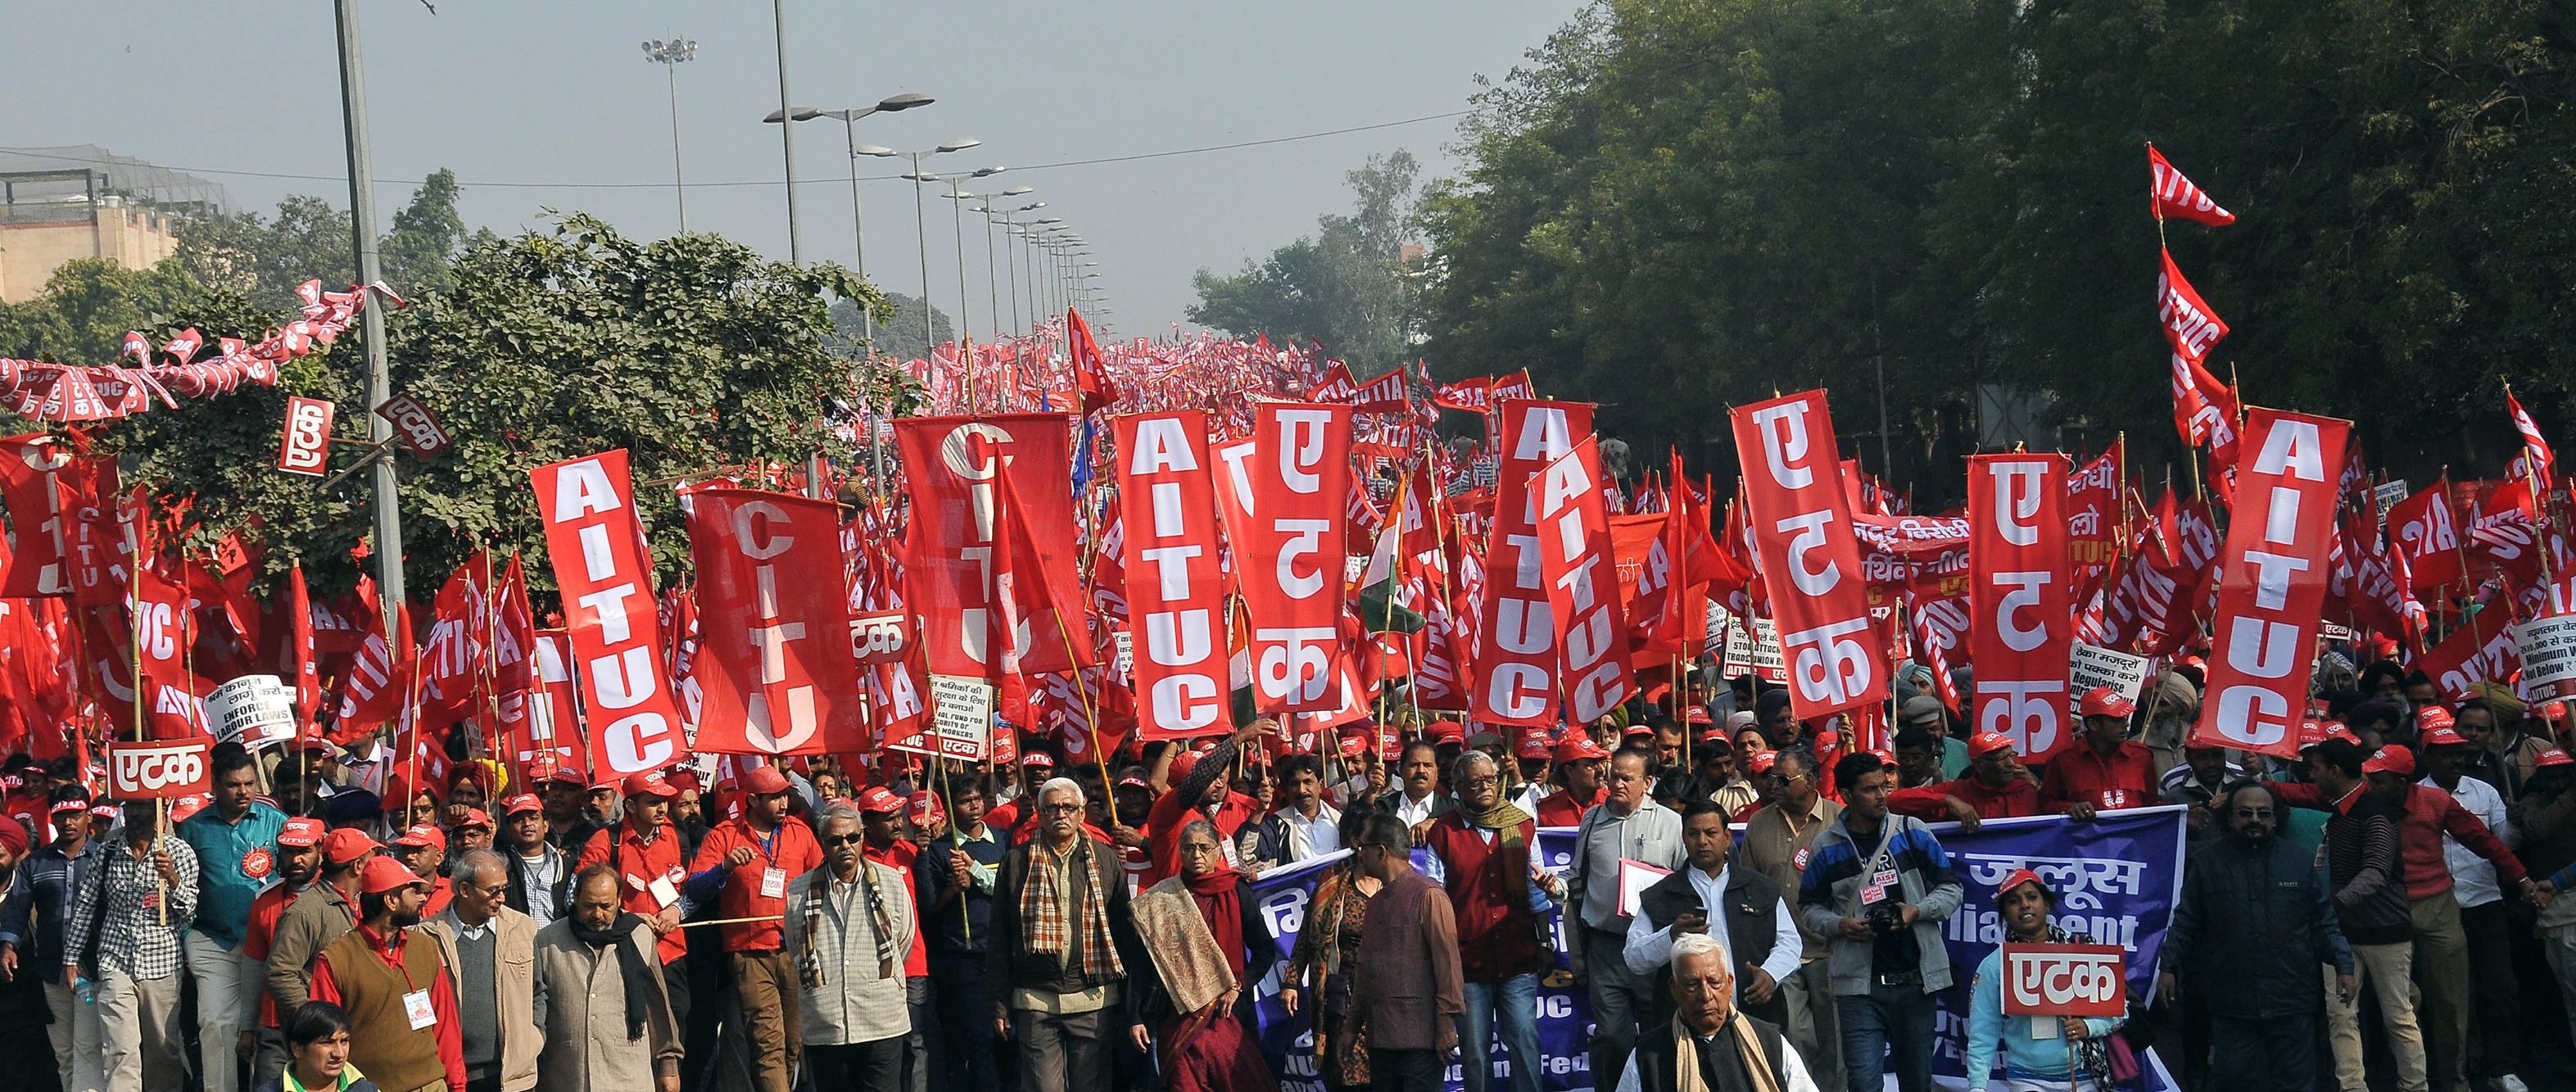 Thousands of workers from all across India marched towards parliament on Thursday, demanding decent wages, implementation of labour laws and containing price rise. At the call of 11 central trade unions (Led by CITU and AITUC) the mammoth demonstration warned the government to end inaction and indifference to workers’ demands